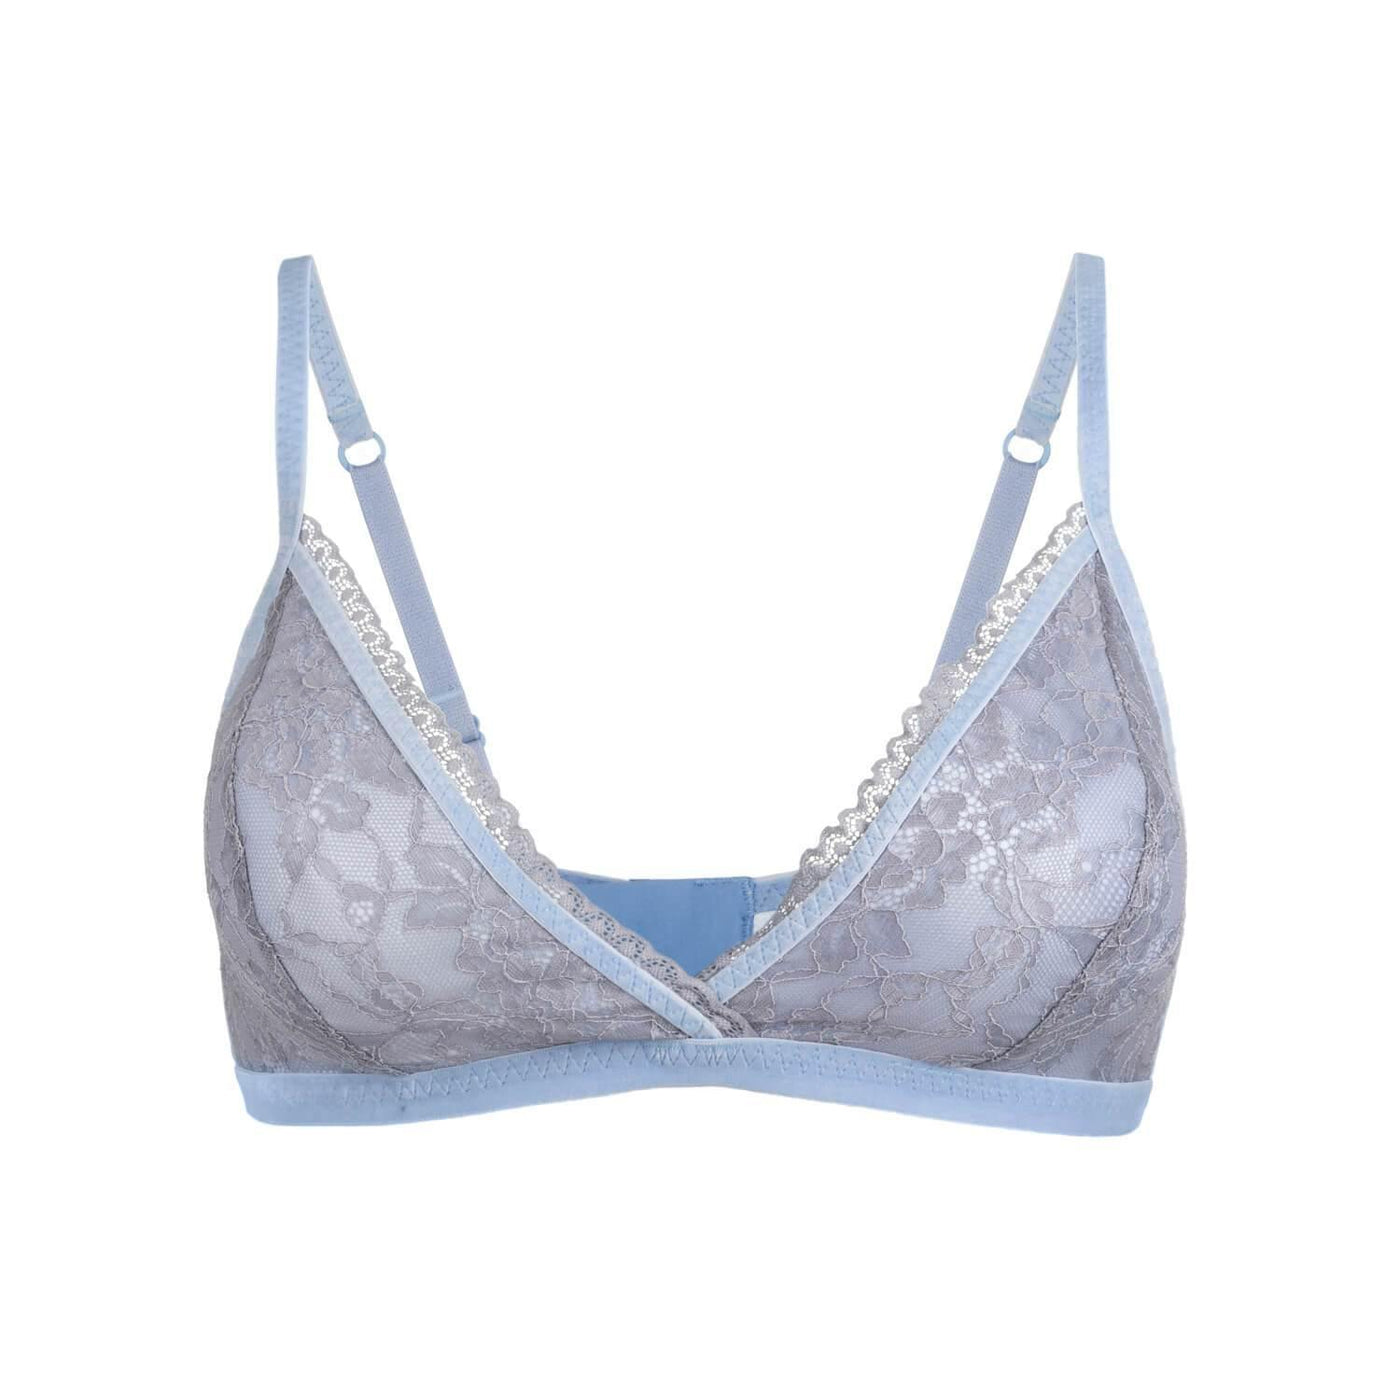 Organic Cotton Lace Triangle Padded Bralette Navy by Cotton On